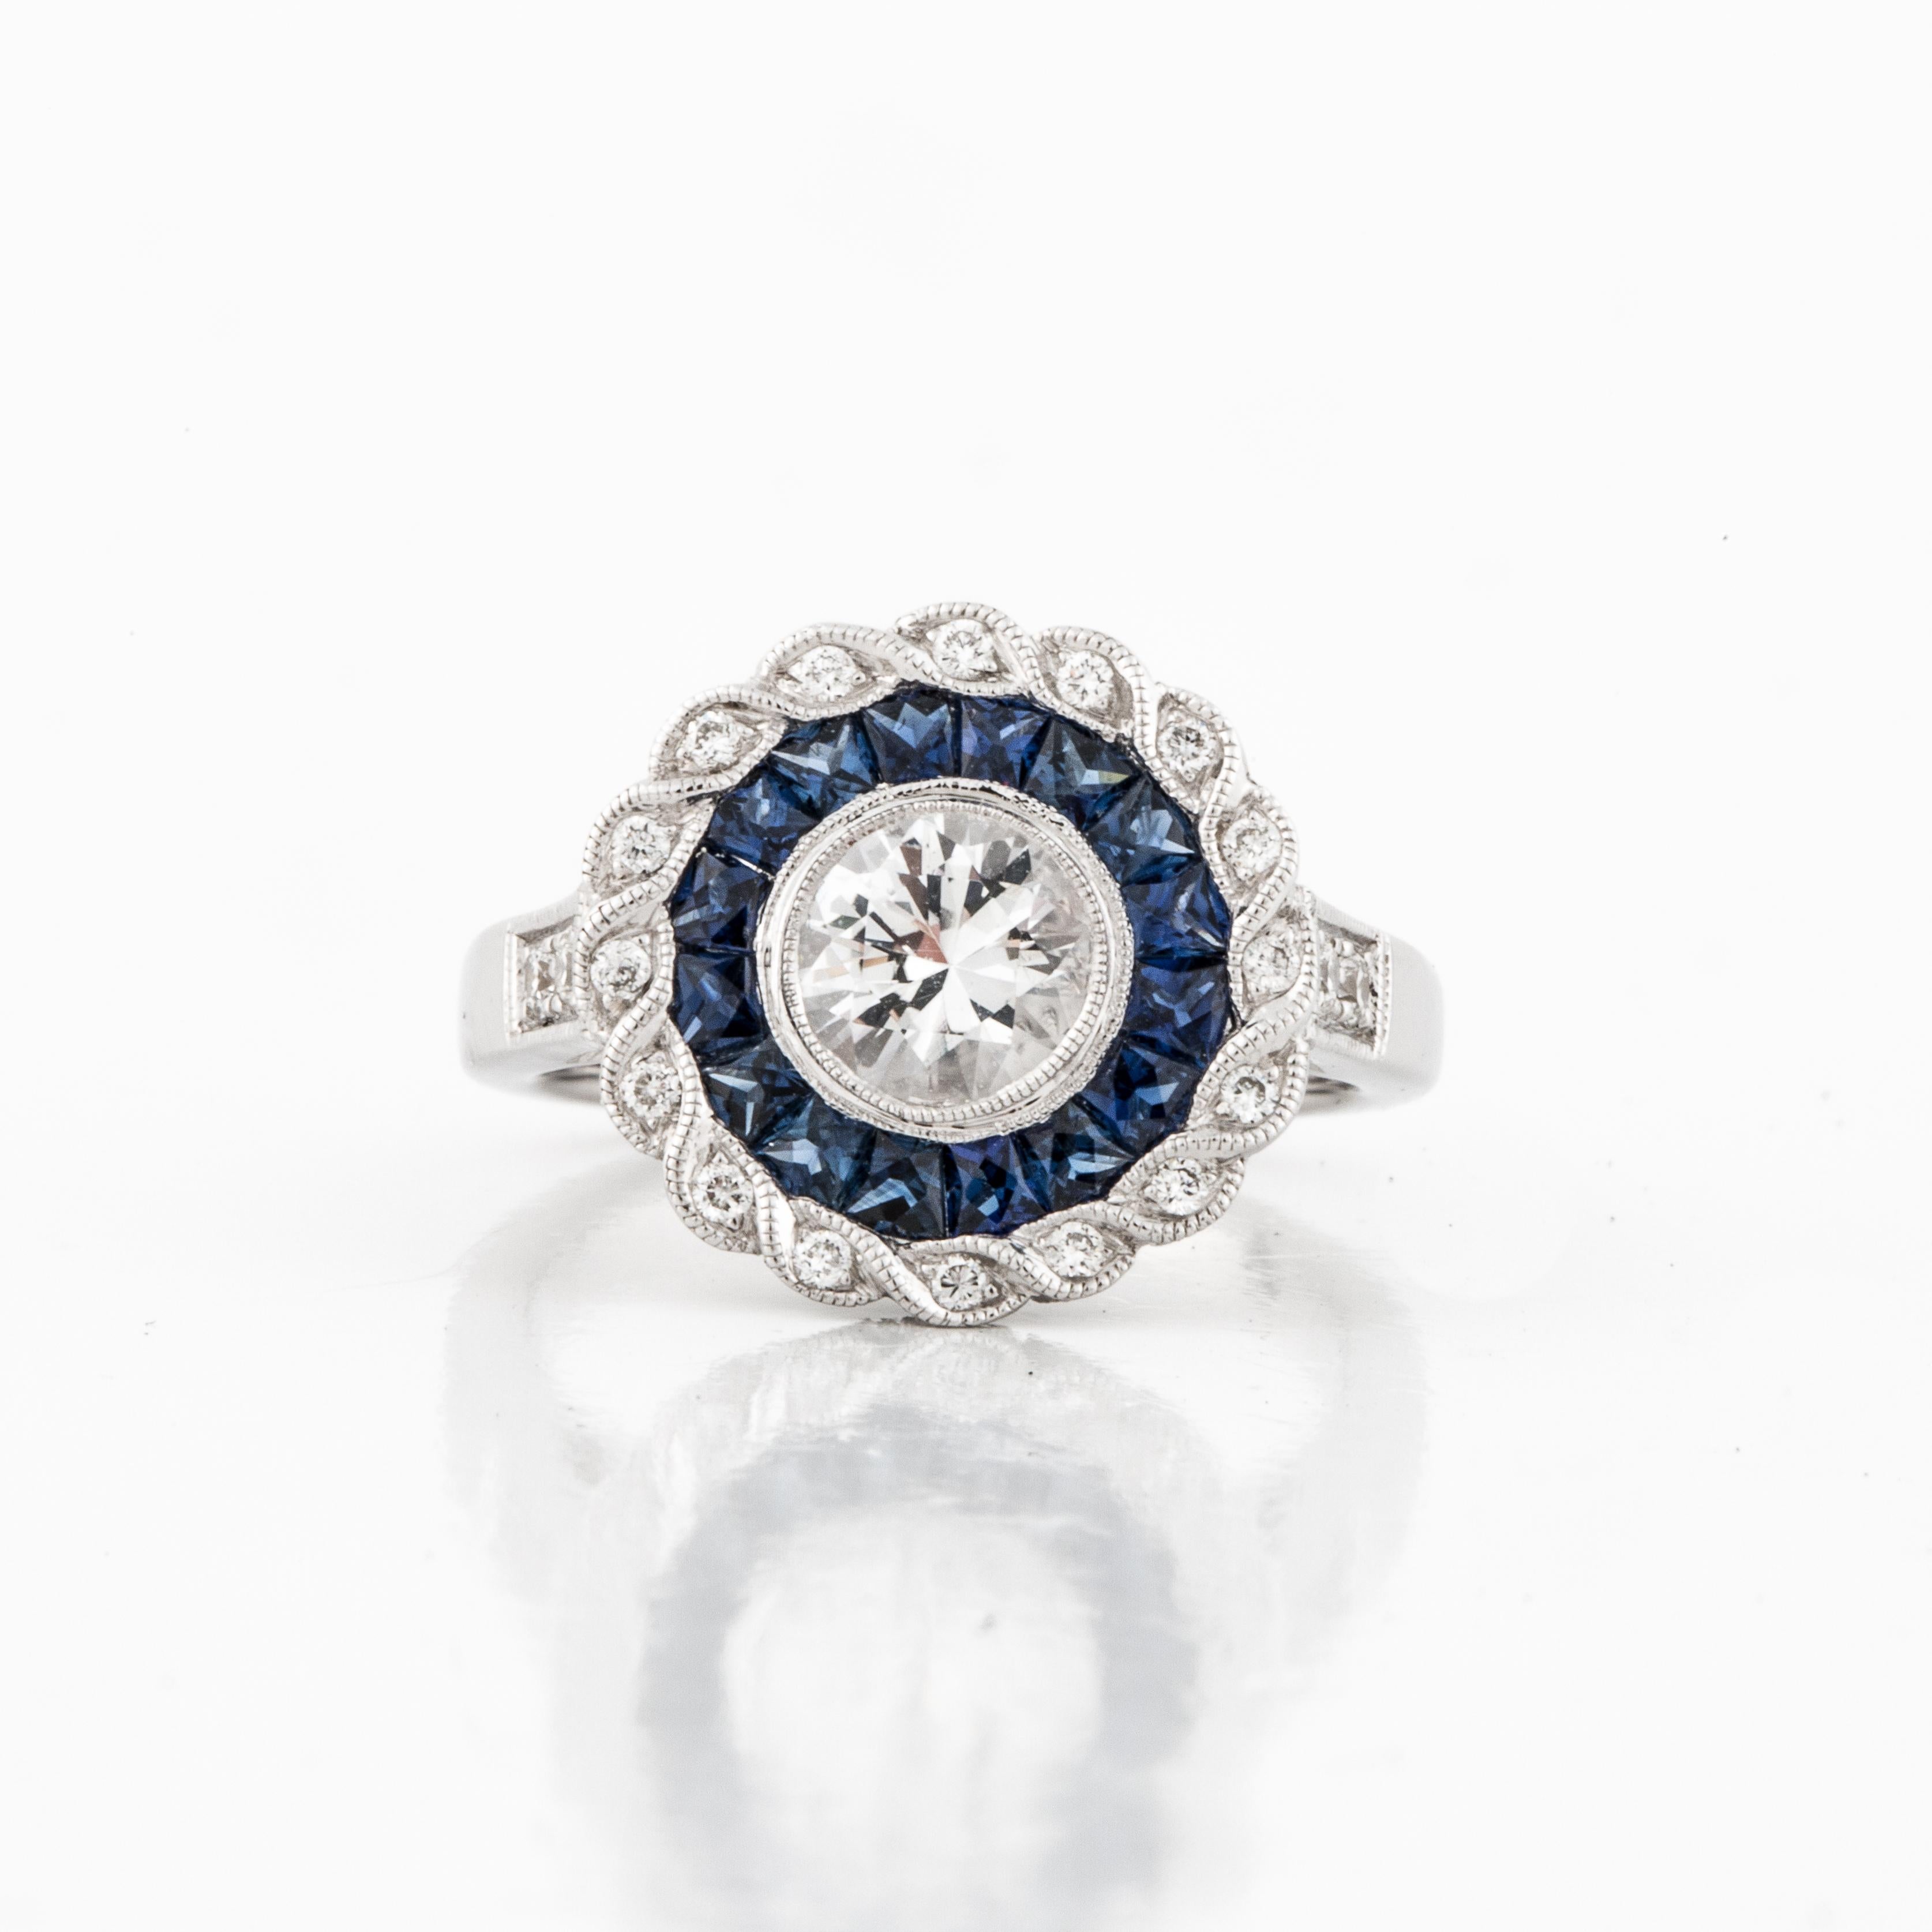 Modern version of a vintage target ring in 18K white gold.  The center stone is a colorless beryl weighing 0.75 carats.  Surrounding the beryl are 16 blue sapphires with a total carat weight of 0.65.  The outside border contains 20 round diamonds